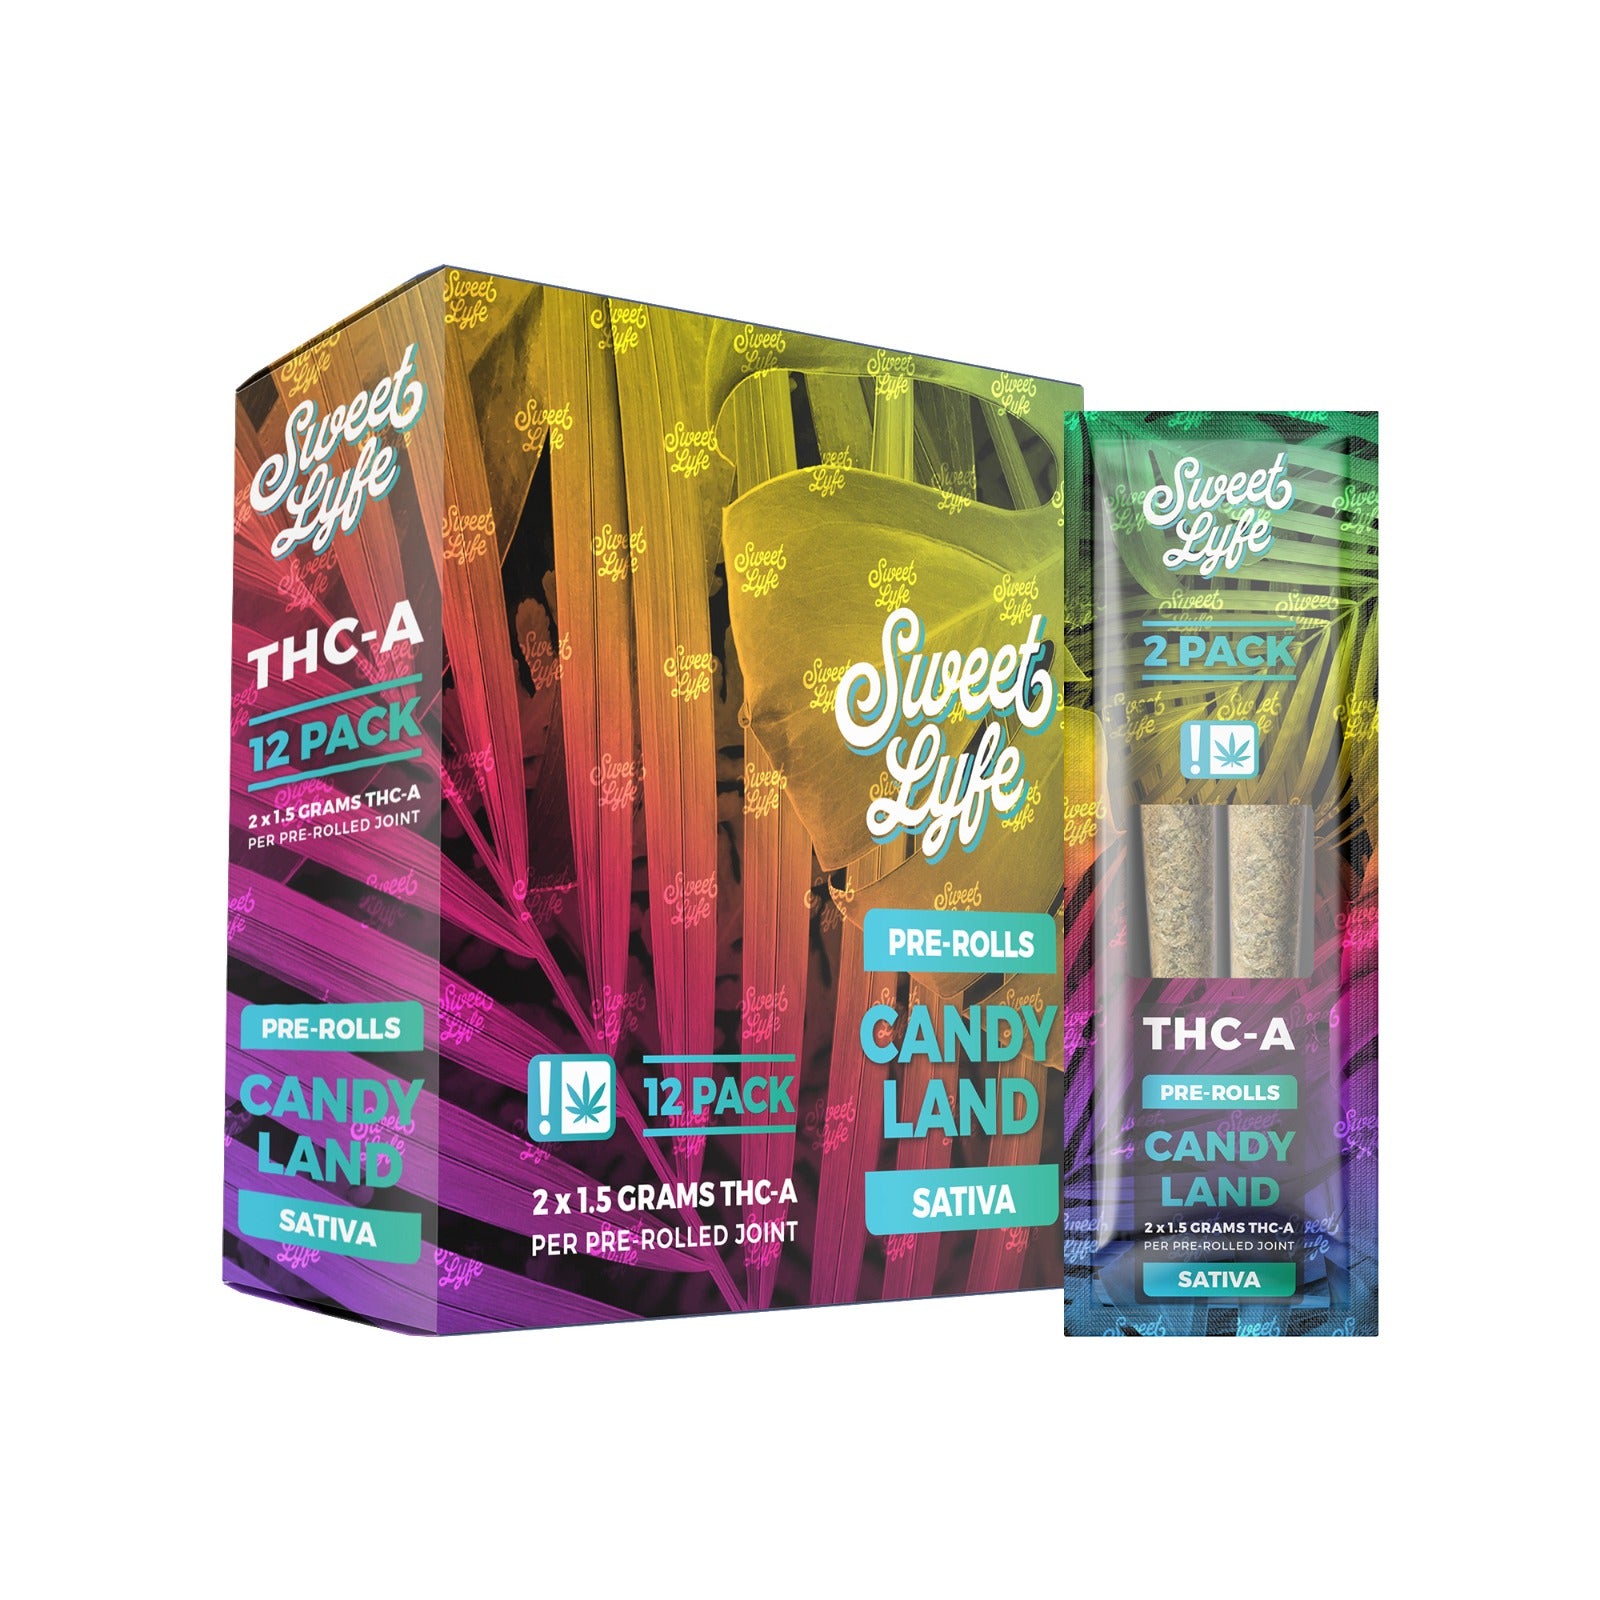 2 Pack Pre-Rolls Joint THC-A|Candy Land- Sativa